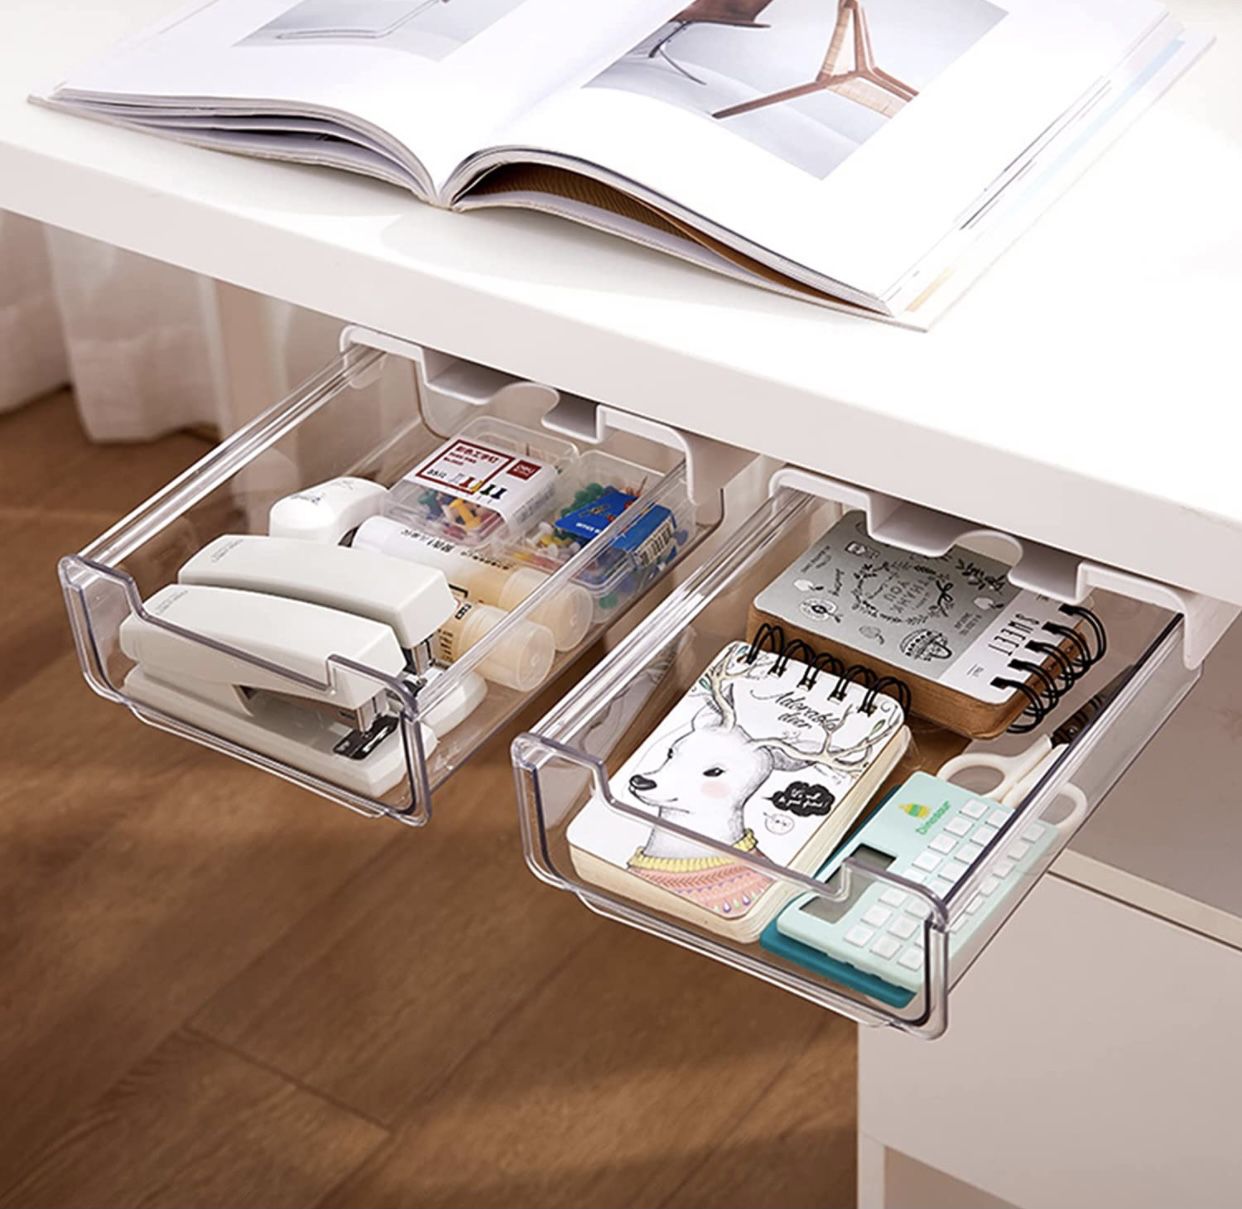 Under Desk Drawer Organizer Slide Out Desk Drawer Attachment,Concealed Self-Adhesive Under Desk Organizer with Independent Storage Space for Cell Phon